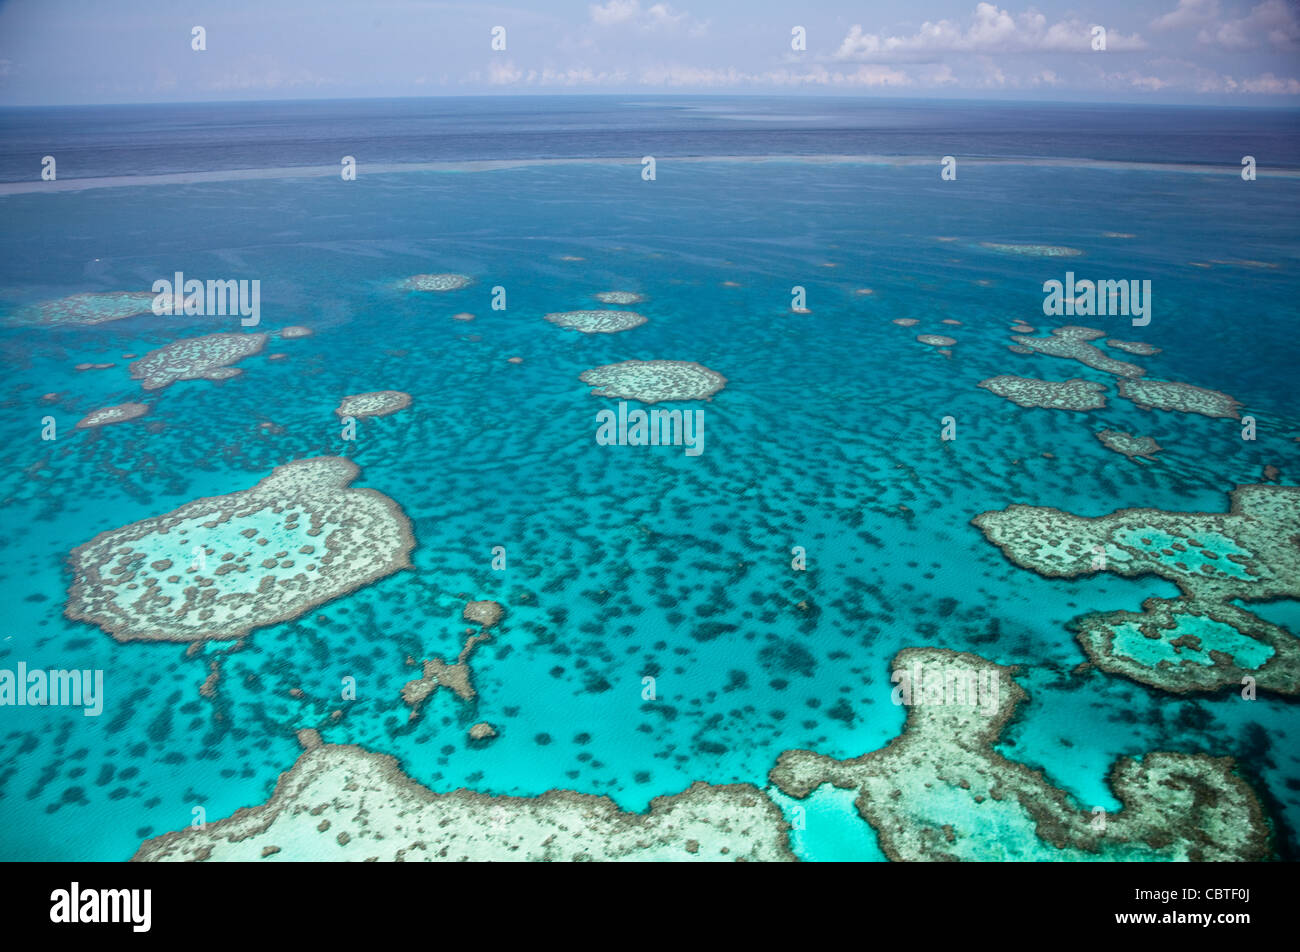 Aerial views of the spectacular Great Barrier Reef near the Whitsunday Islands in Queensland, Australia. Stock Photo